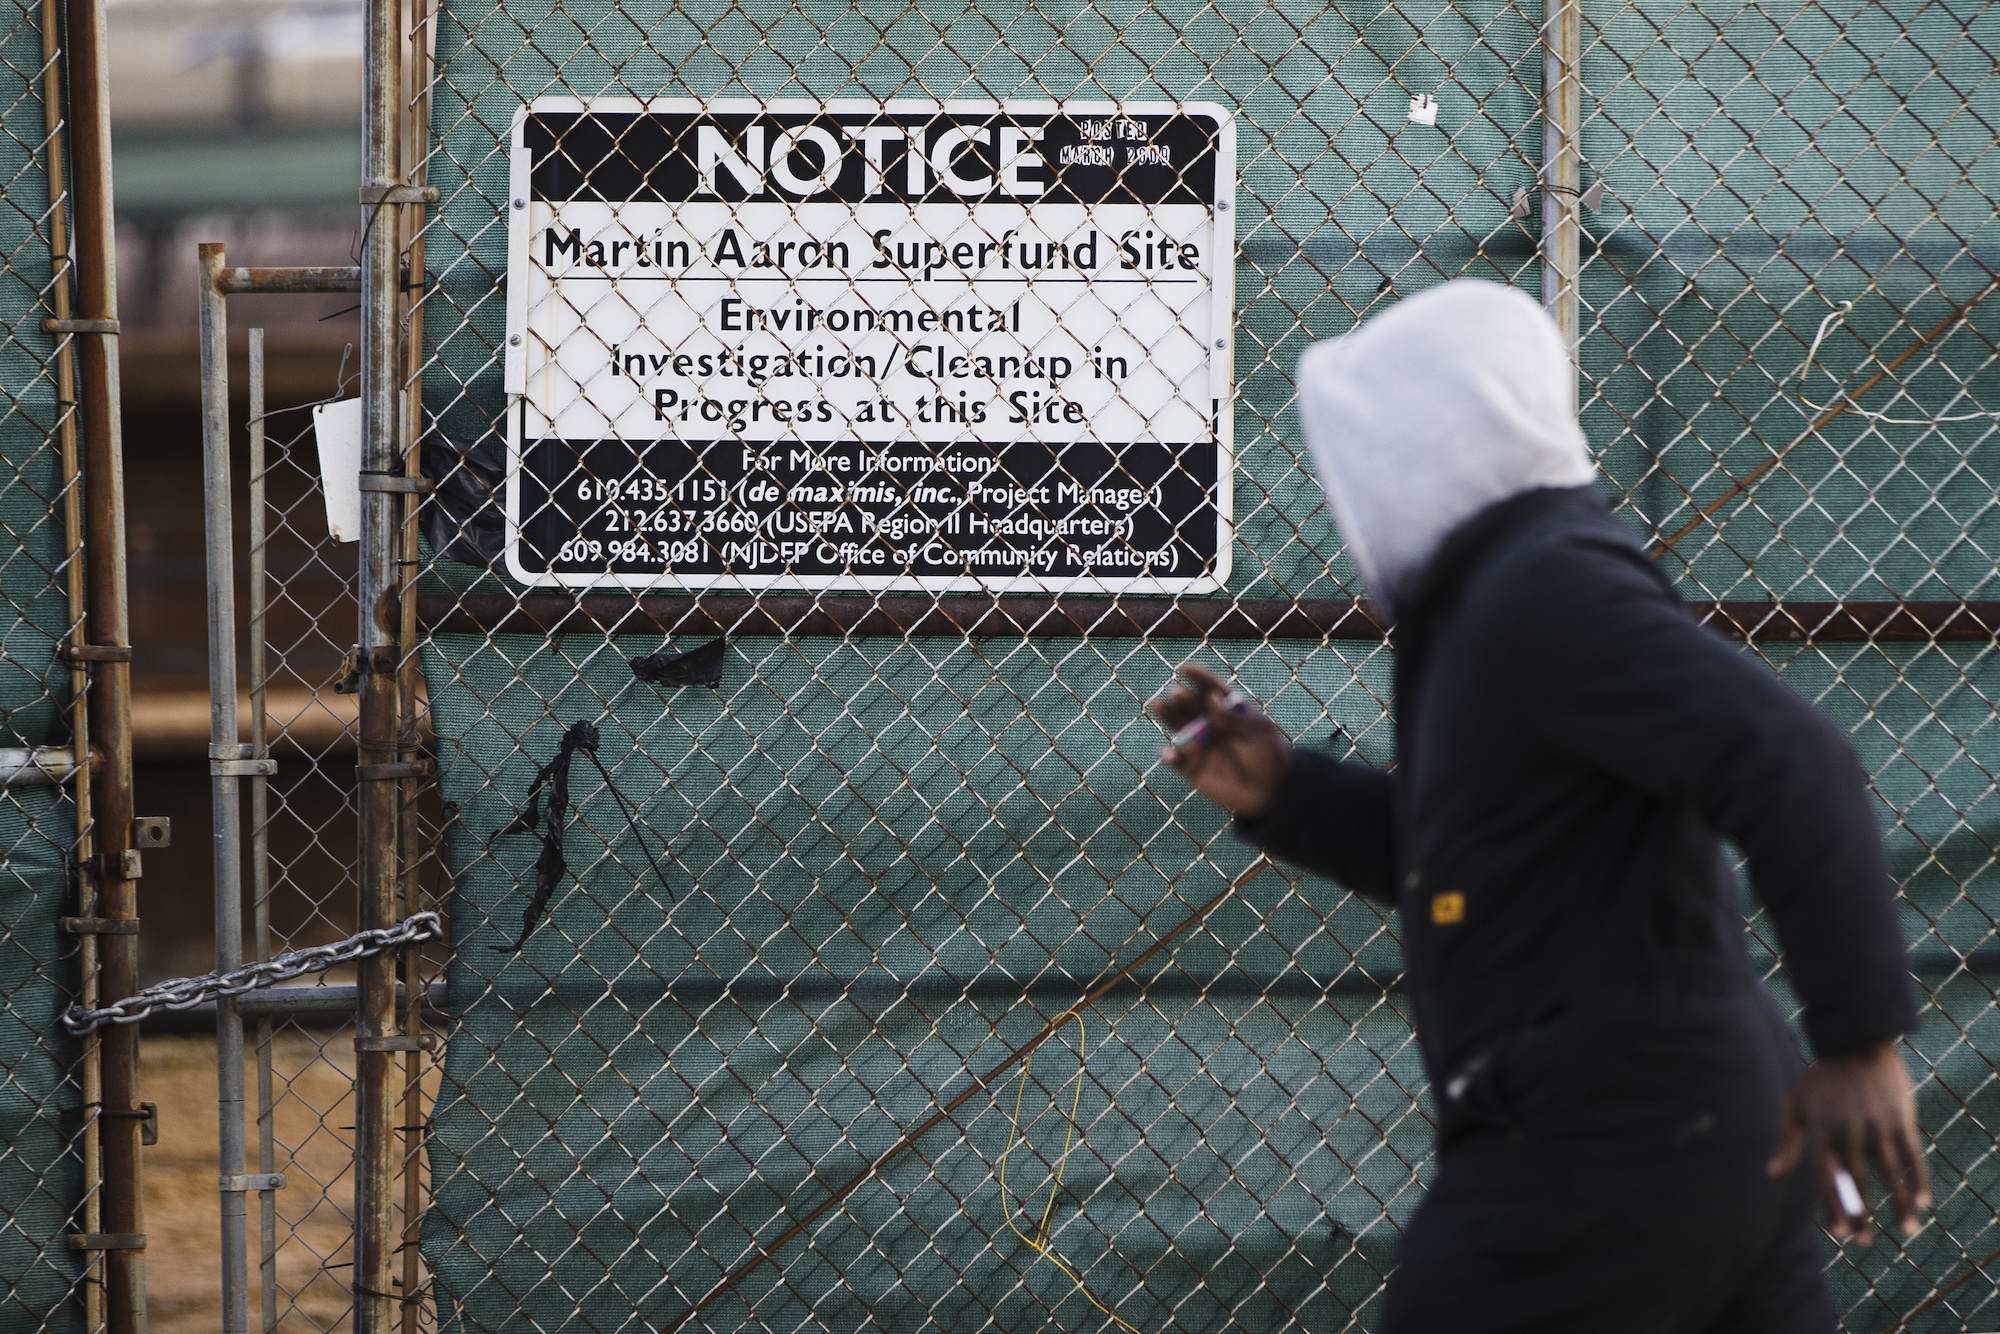 A photo of a man waking past a sign for the Martin Aaron Inc. Superfund site in Camden, New Jersey